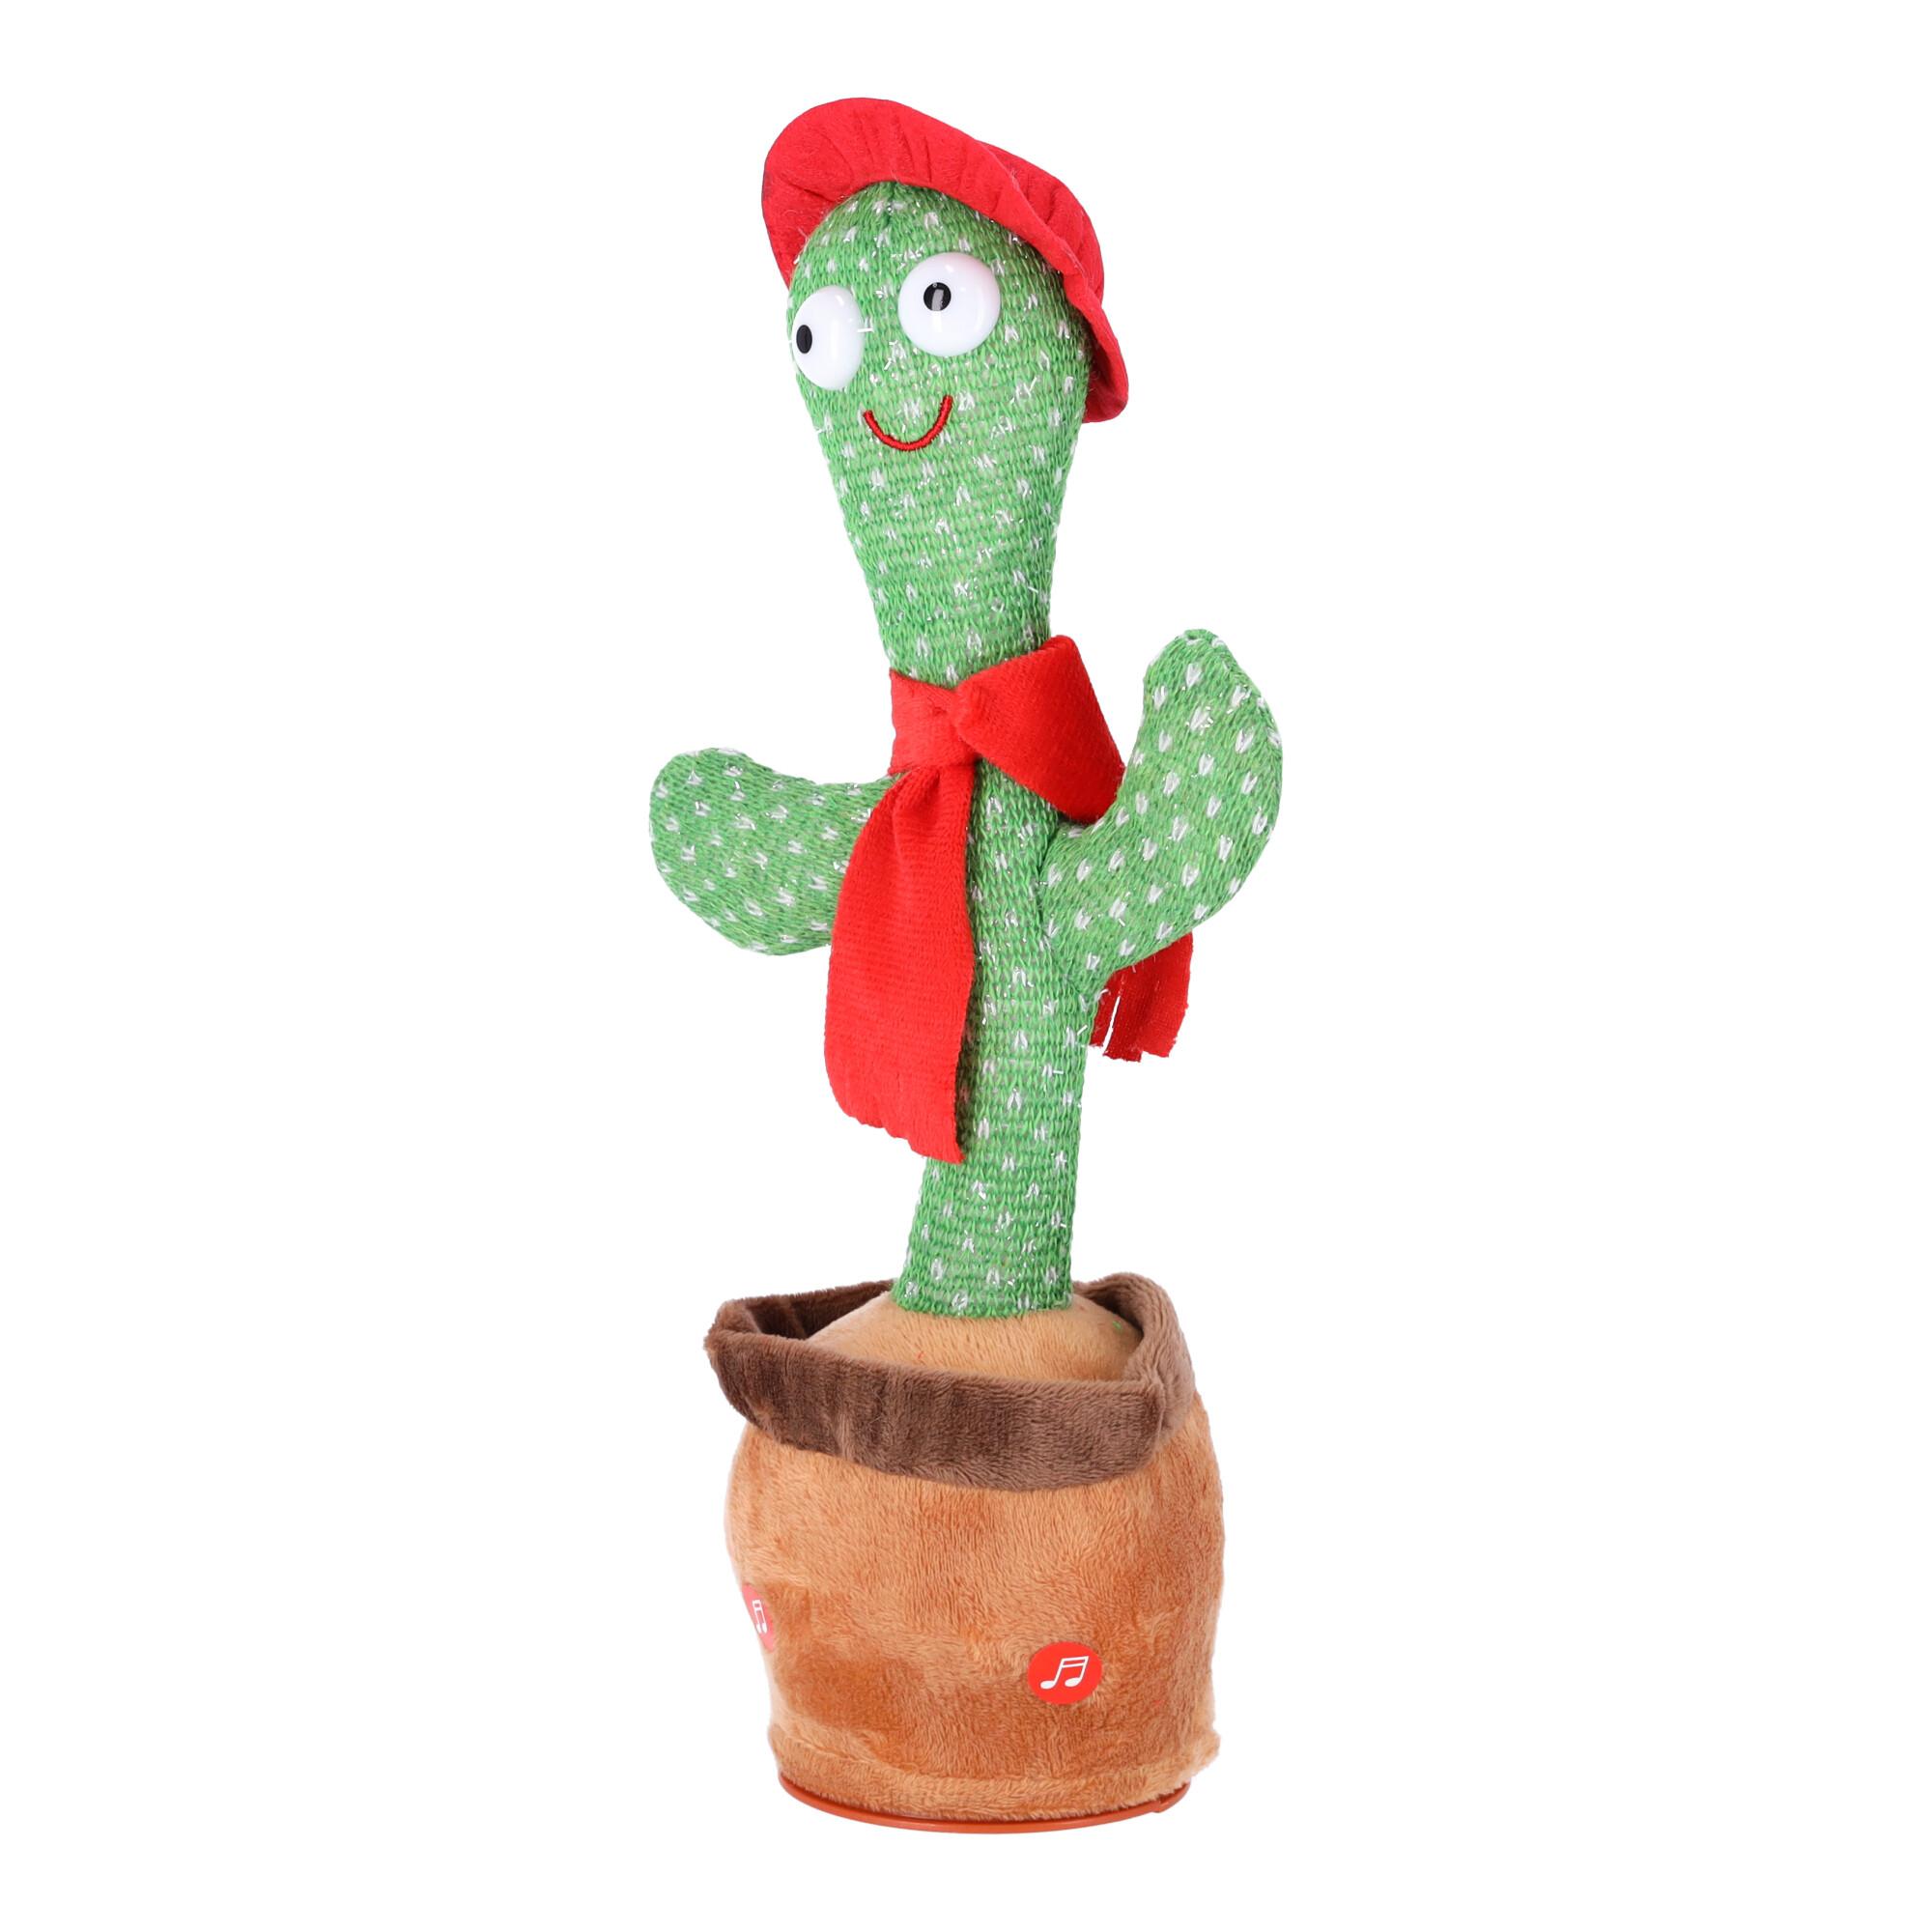 Children's toy - Dancing cactus - with red checkered  and red hat